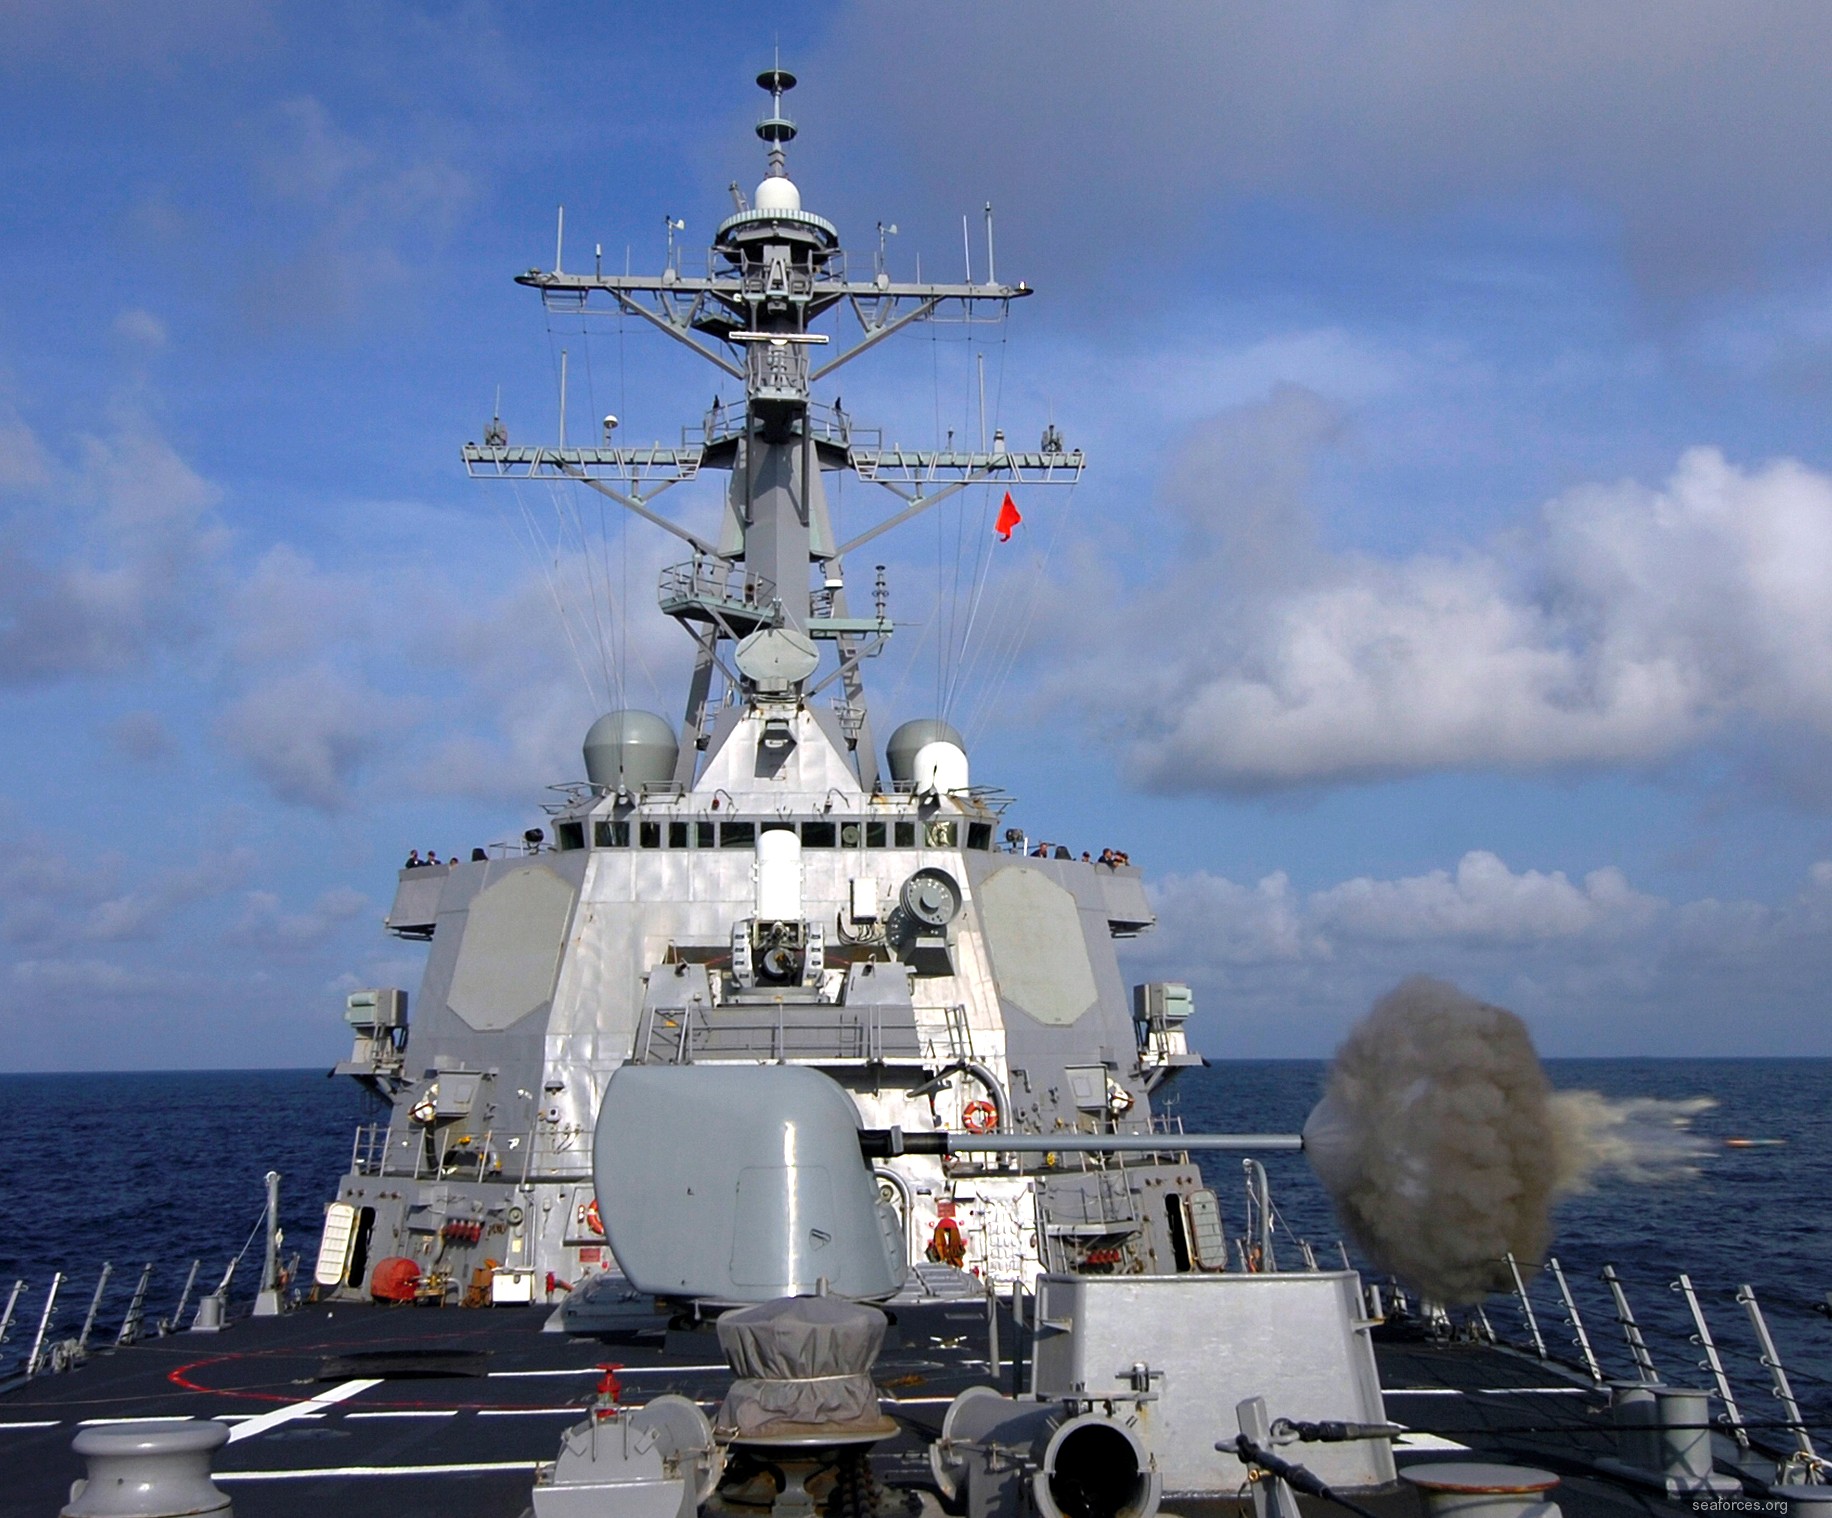 ddg-59 uss russell guided missile destroyer us navy 43 mk-45 mod.2 gun fire